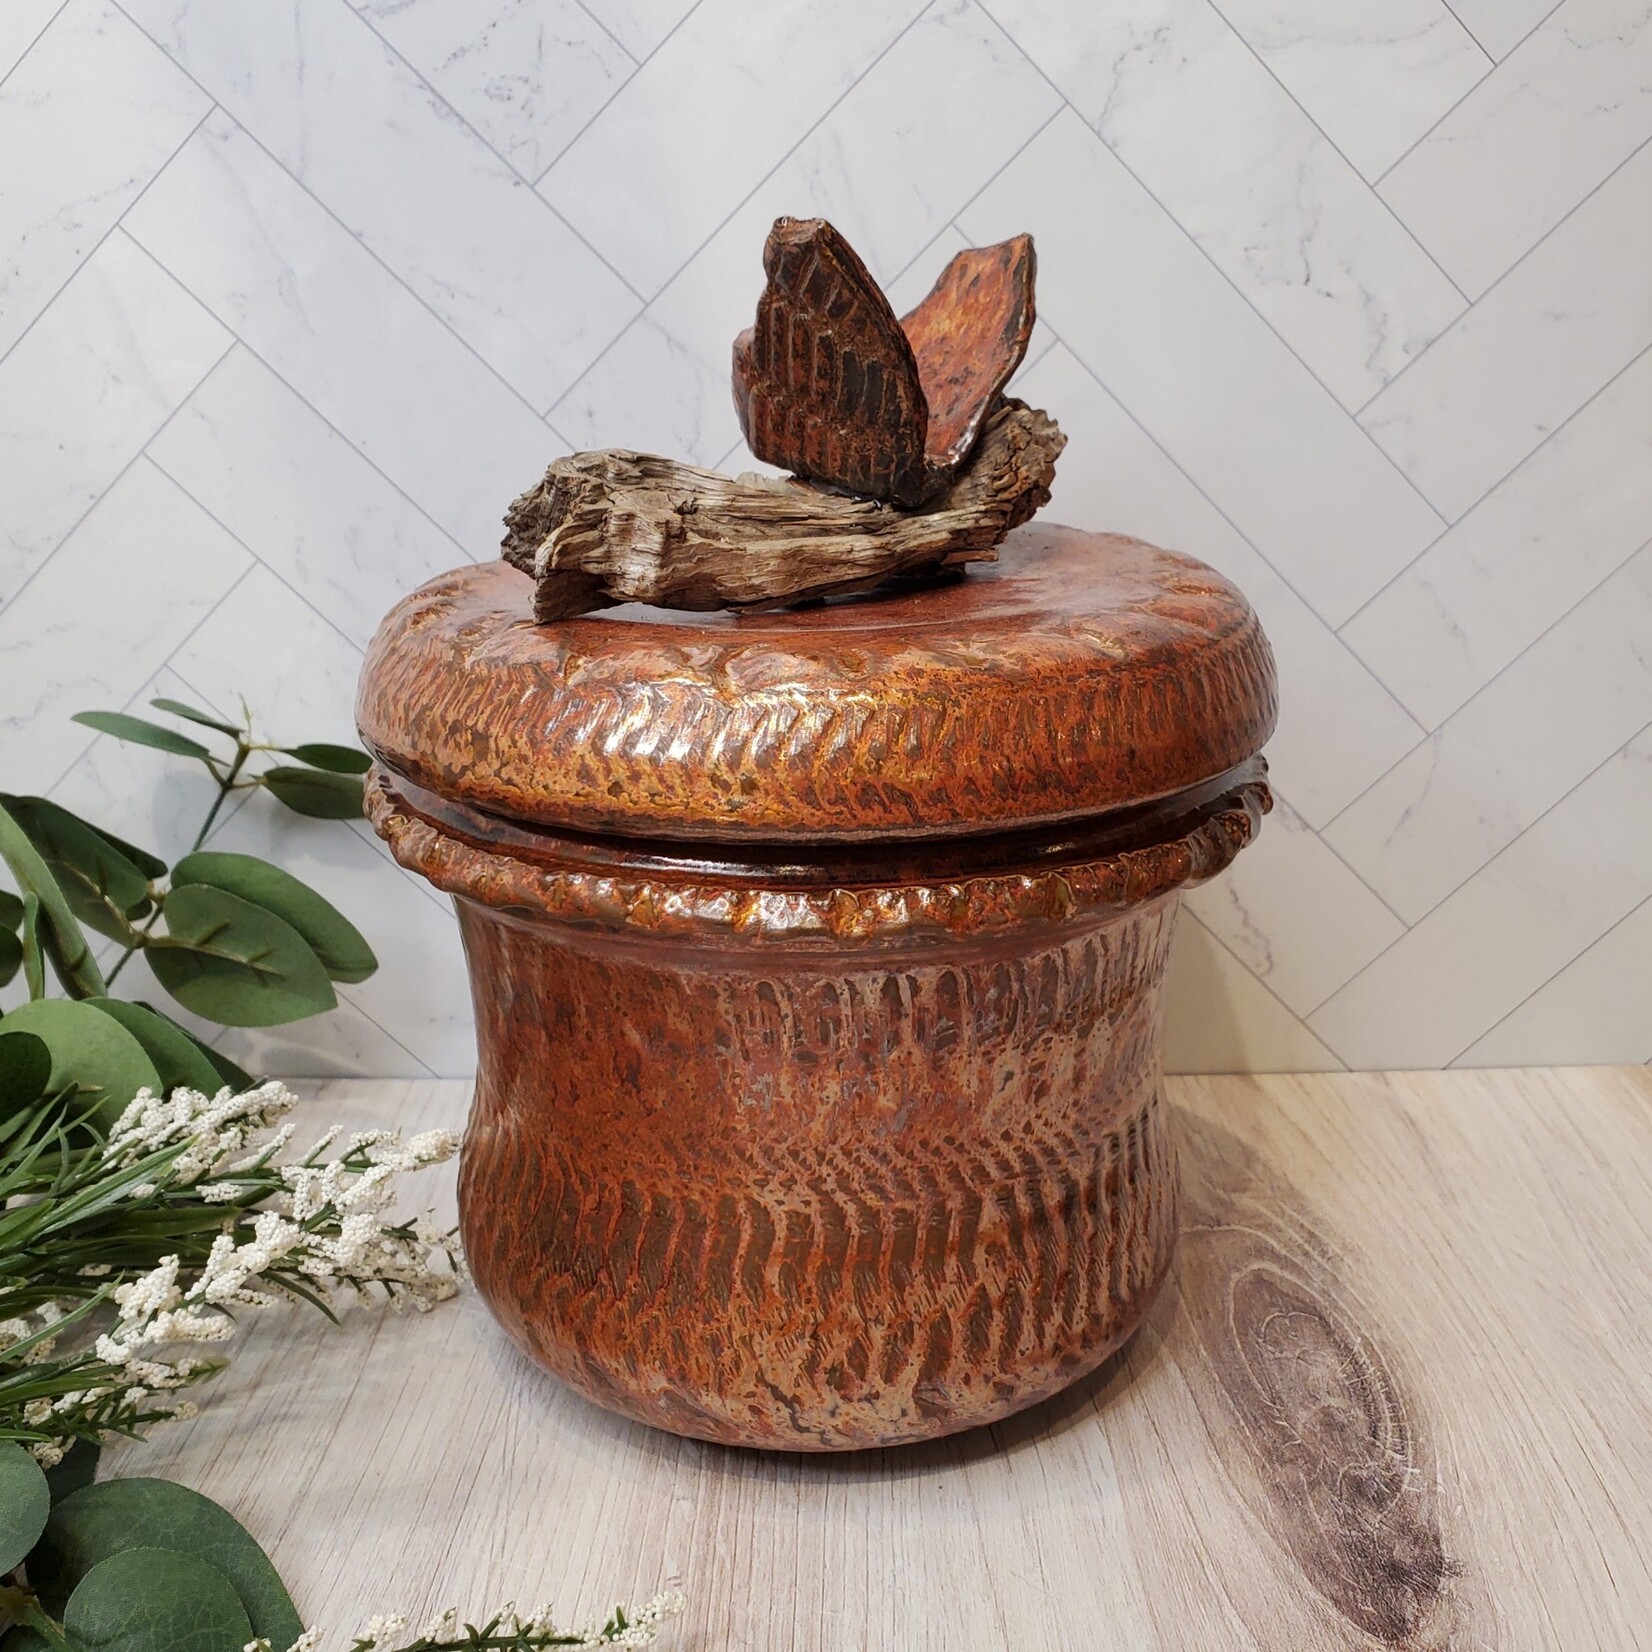 Elaine Randall Dream Jar with Forest Driftwood and Butterfly - Ancient Copper Glaze